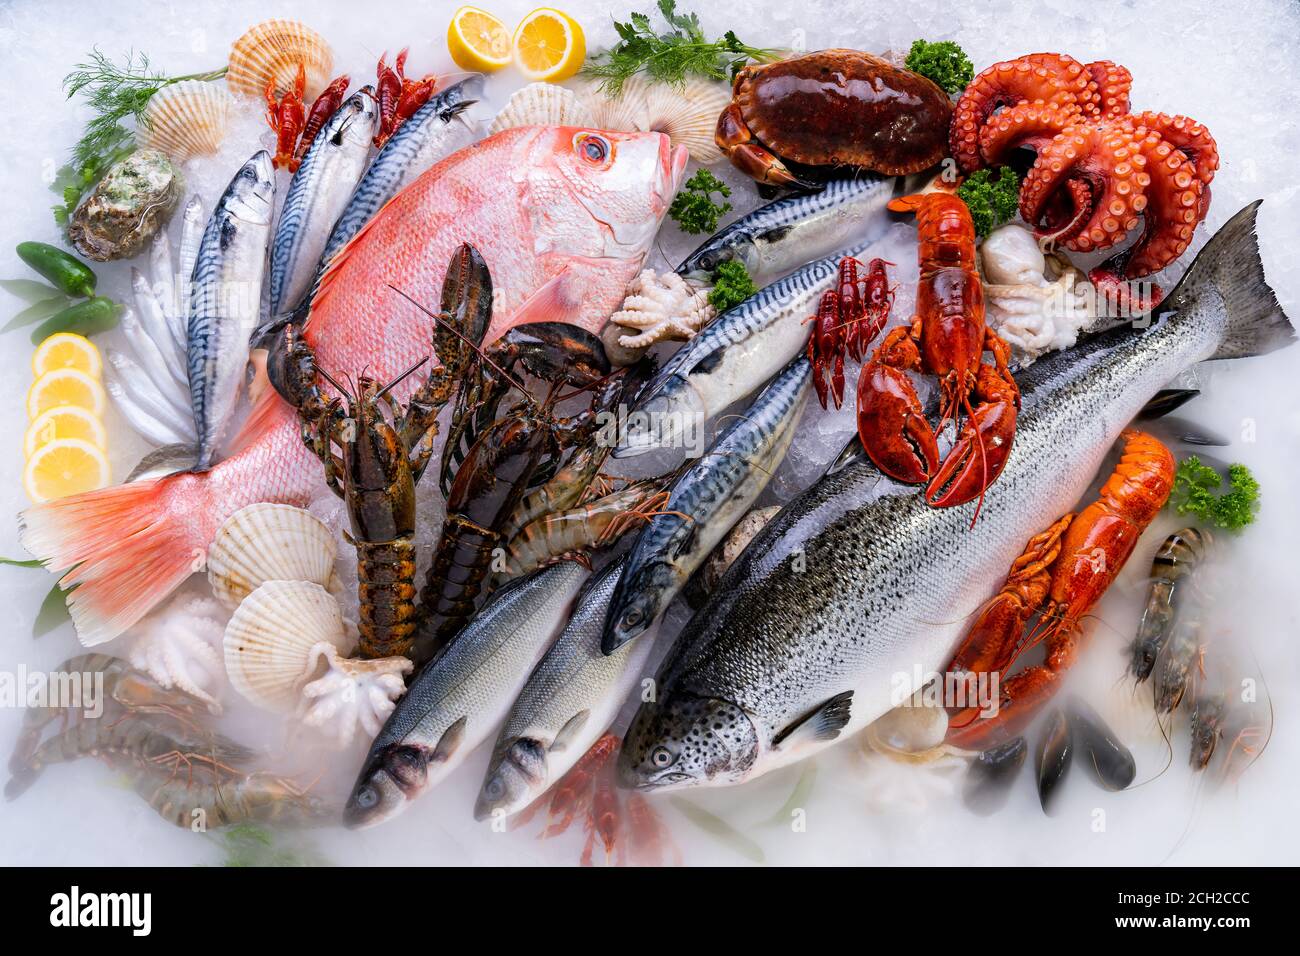 Top view Variety of fresh luxury seafood, Lobster salmon mackerel crayfish prawn octopus mussel red snapper scallop and stone crab, on ice background Stock Photo